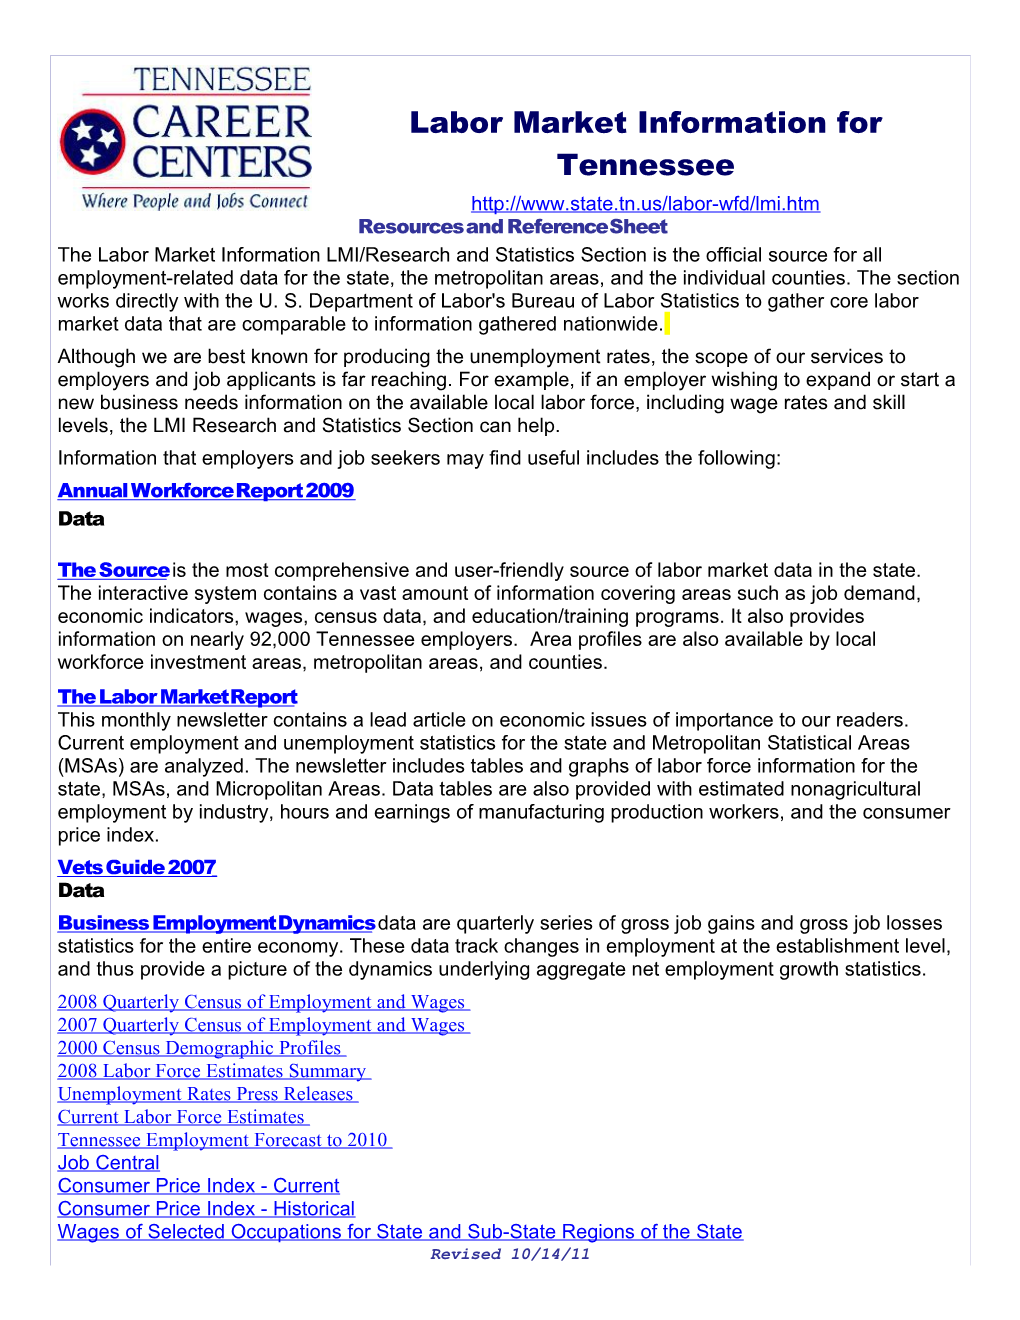 Labor Market Information for Tennessee